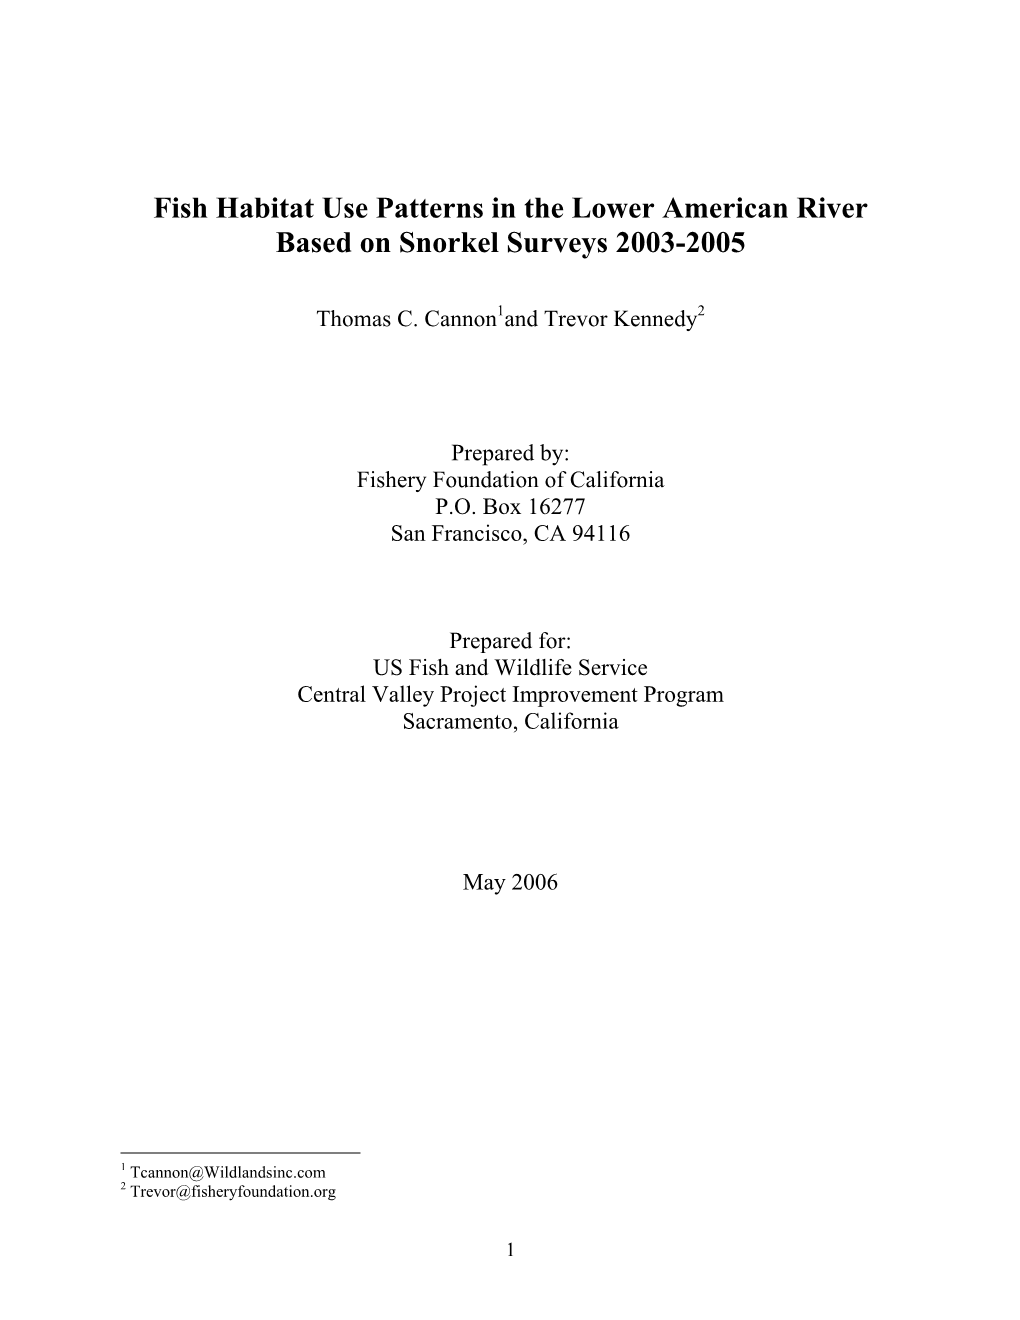 Fish Habitat Use Patterns in the Lower American River Based on Snorkel Surveys 2003-2005